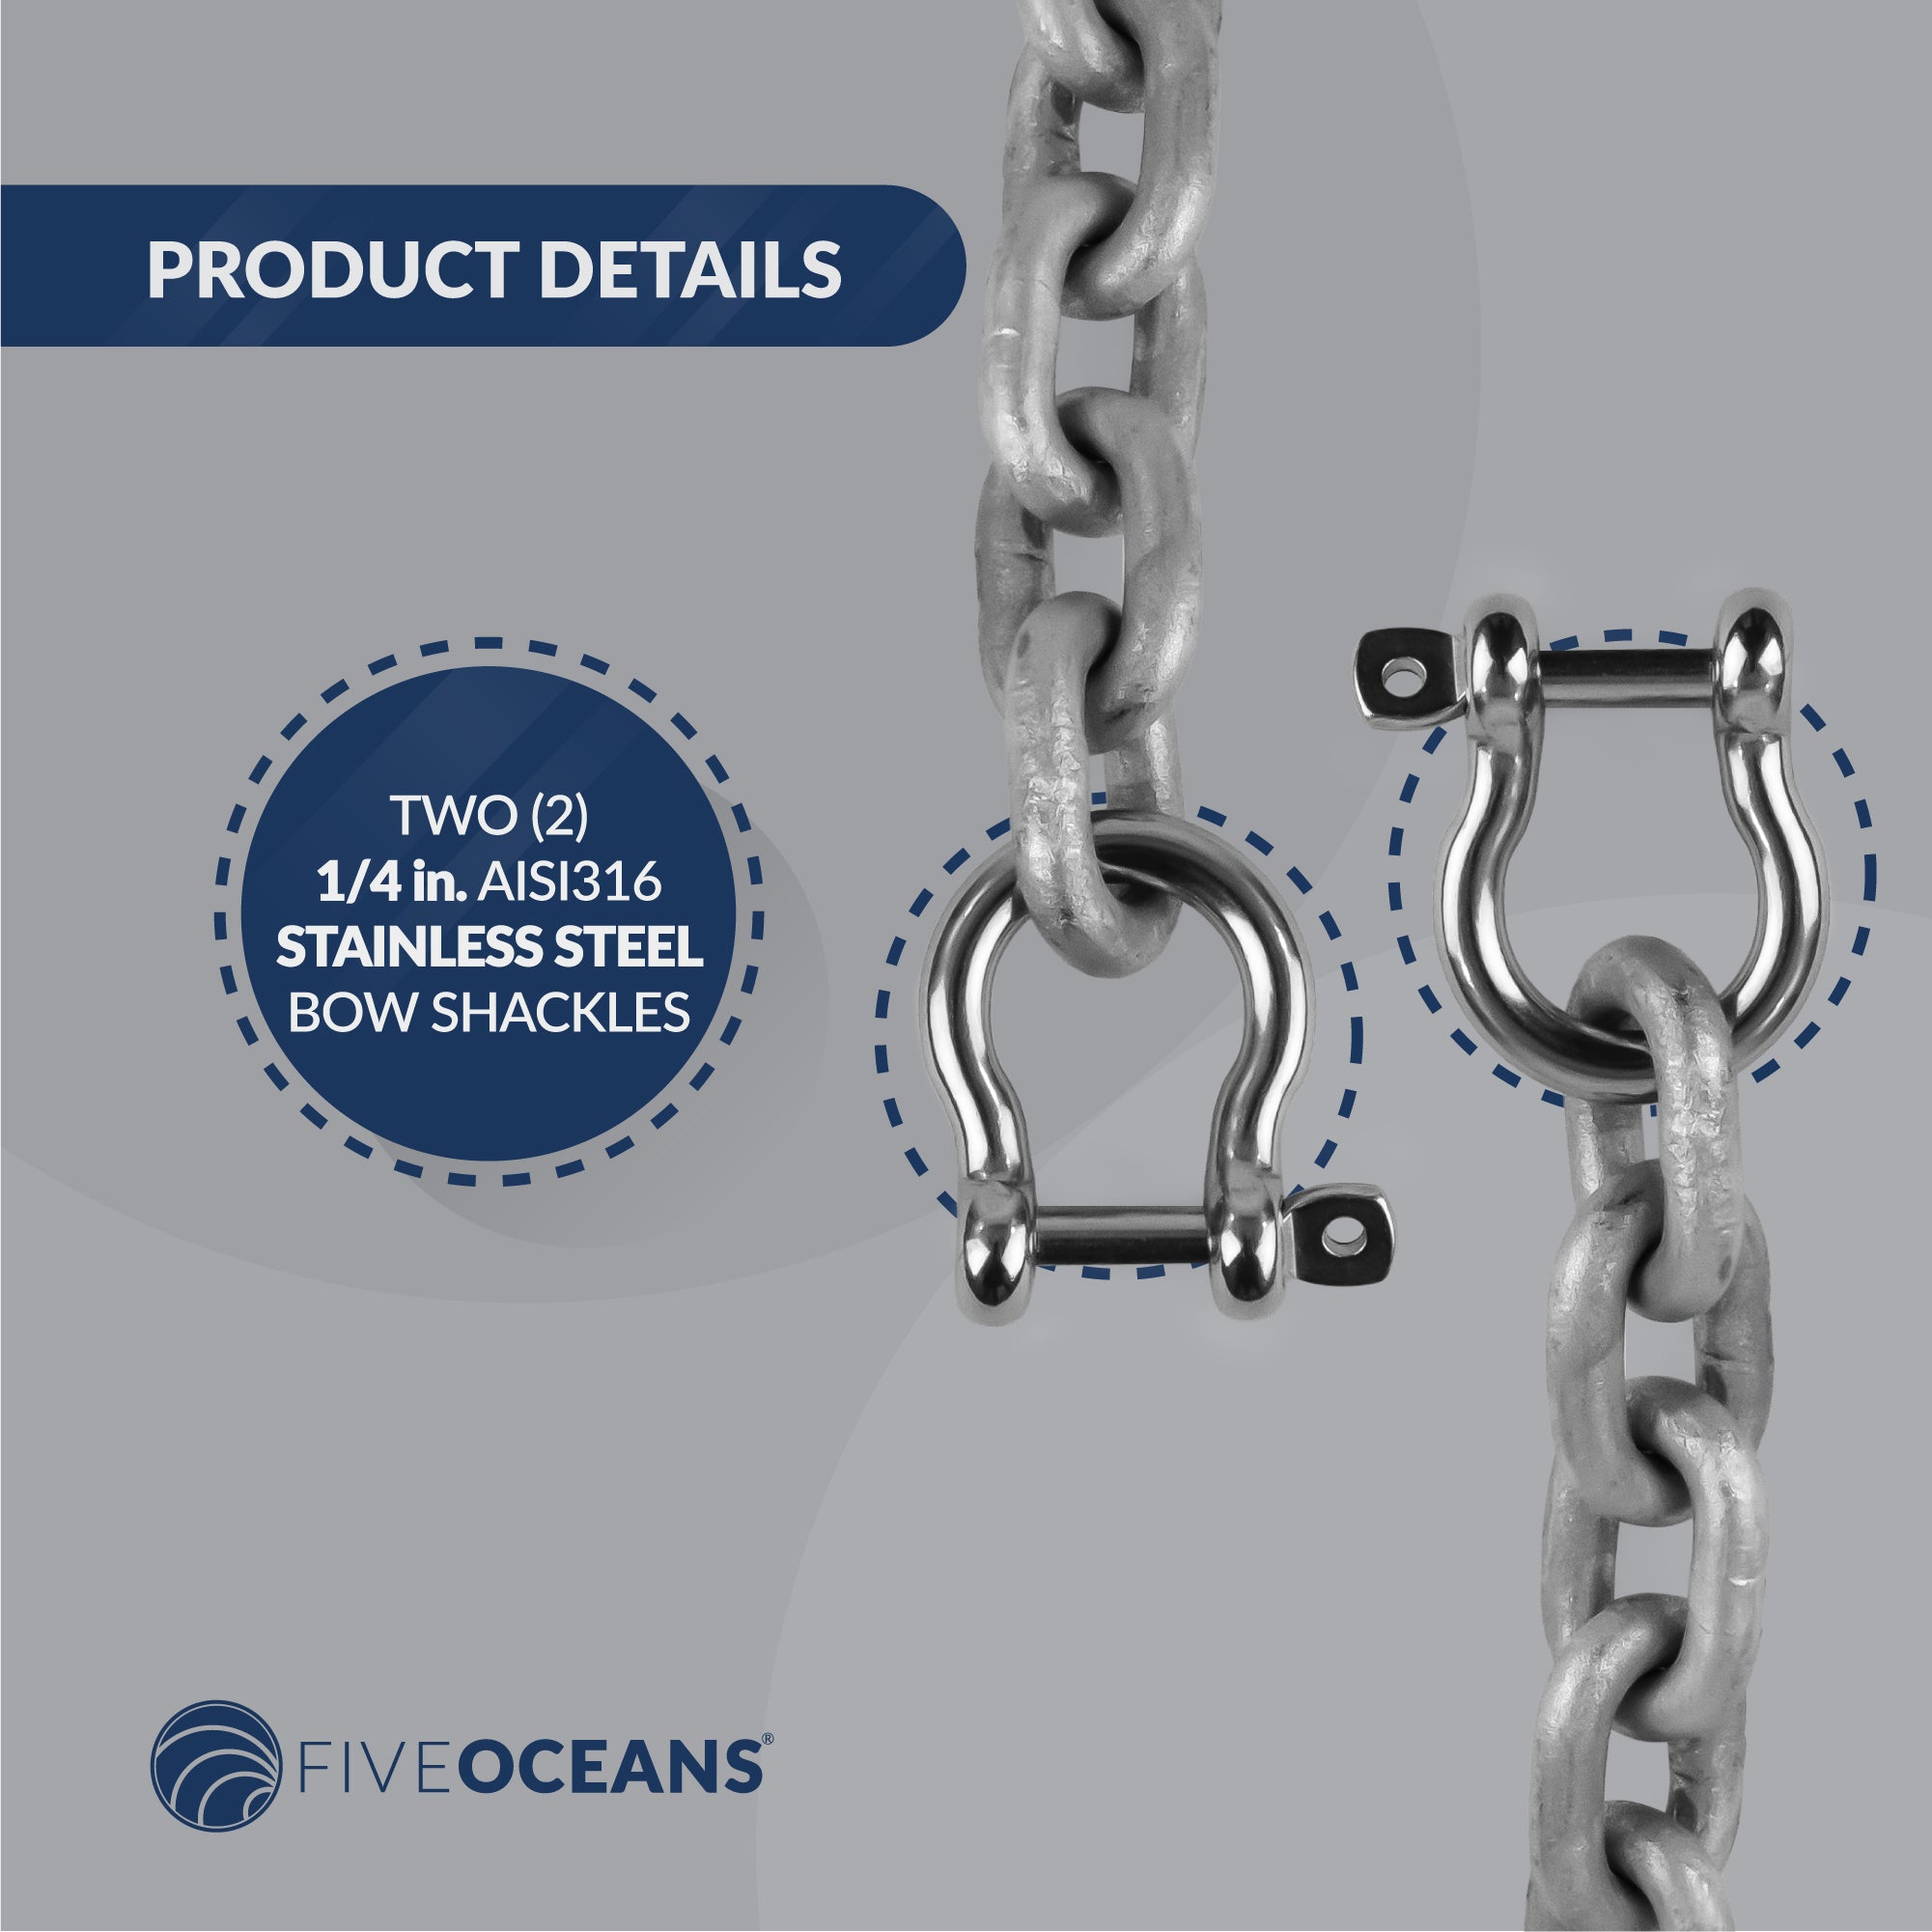 Boat Anchor Lead Chain with Shackles, 1/4" x 10', HTG4 Galvanized Steel - FO4489-G10